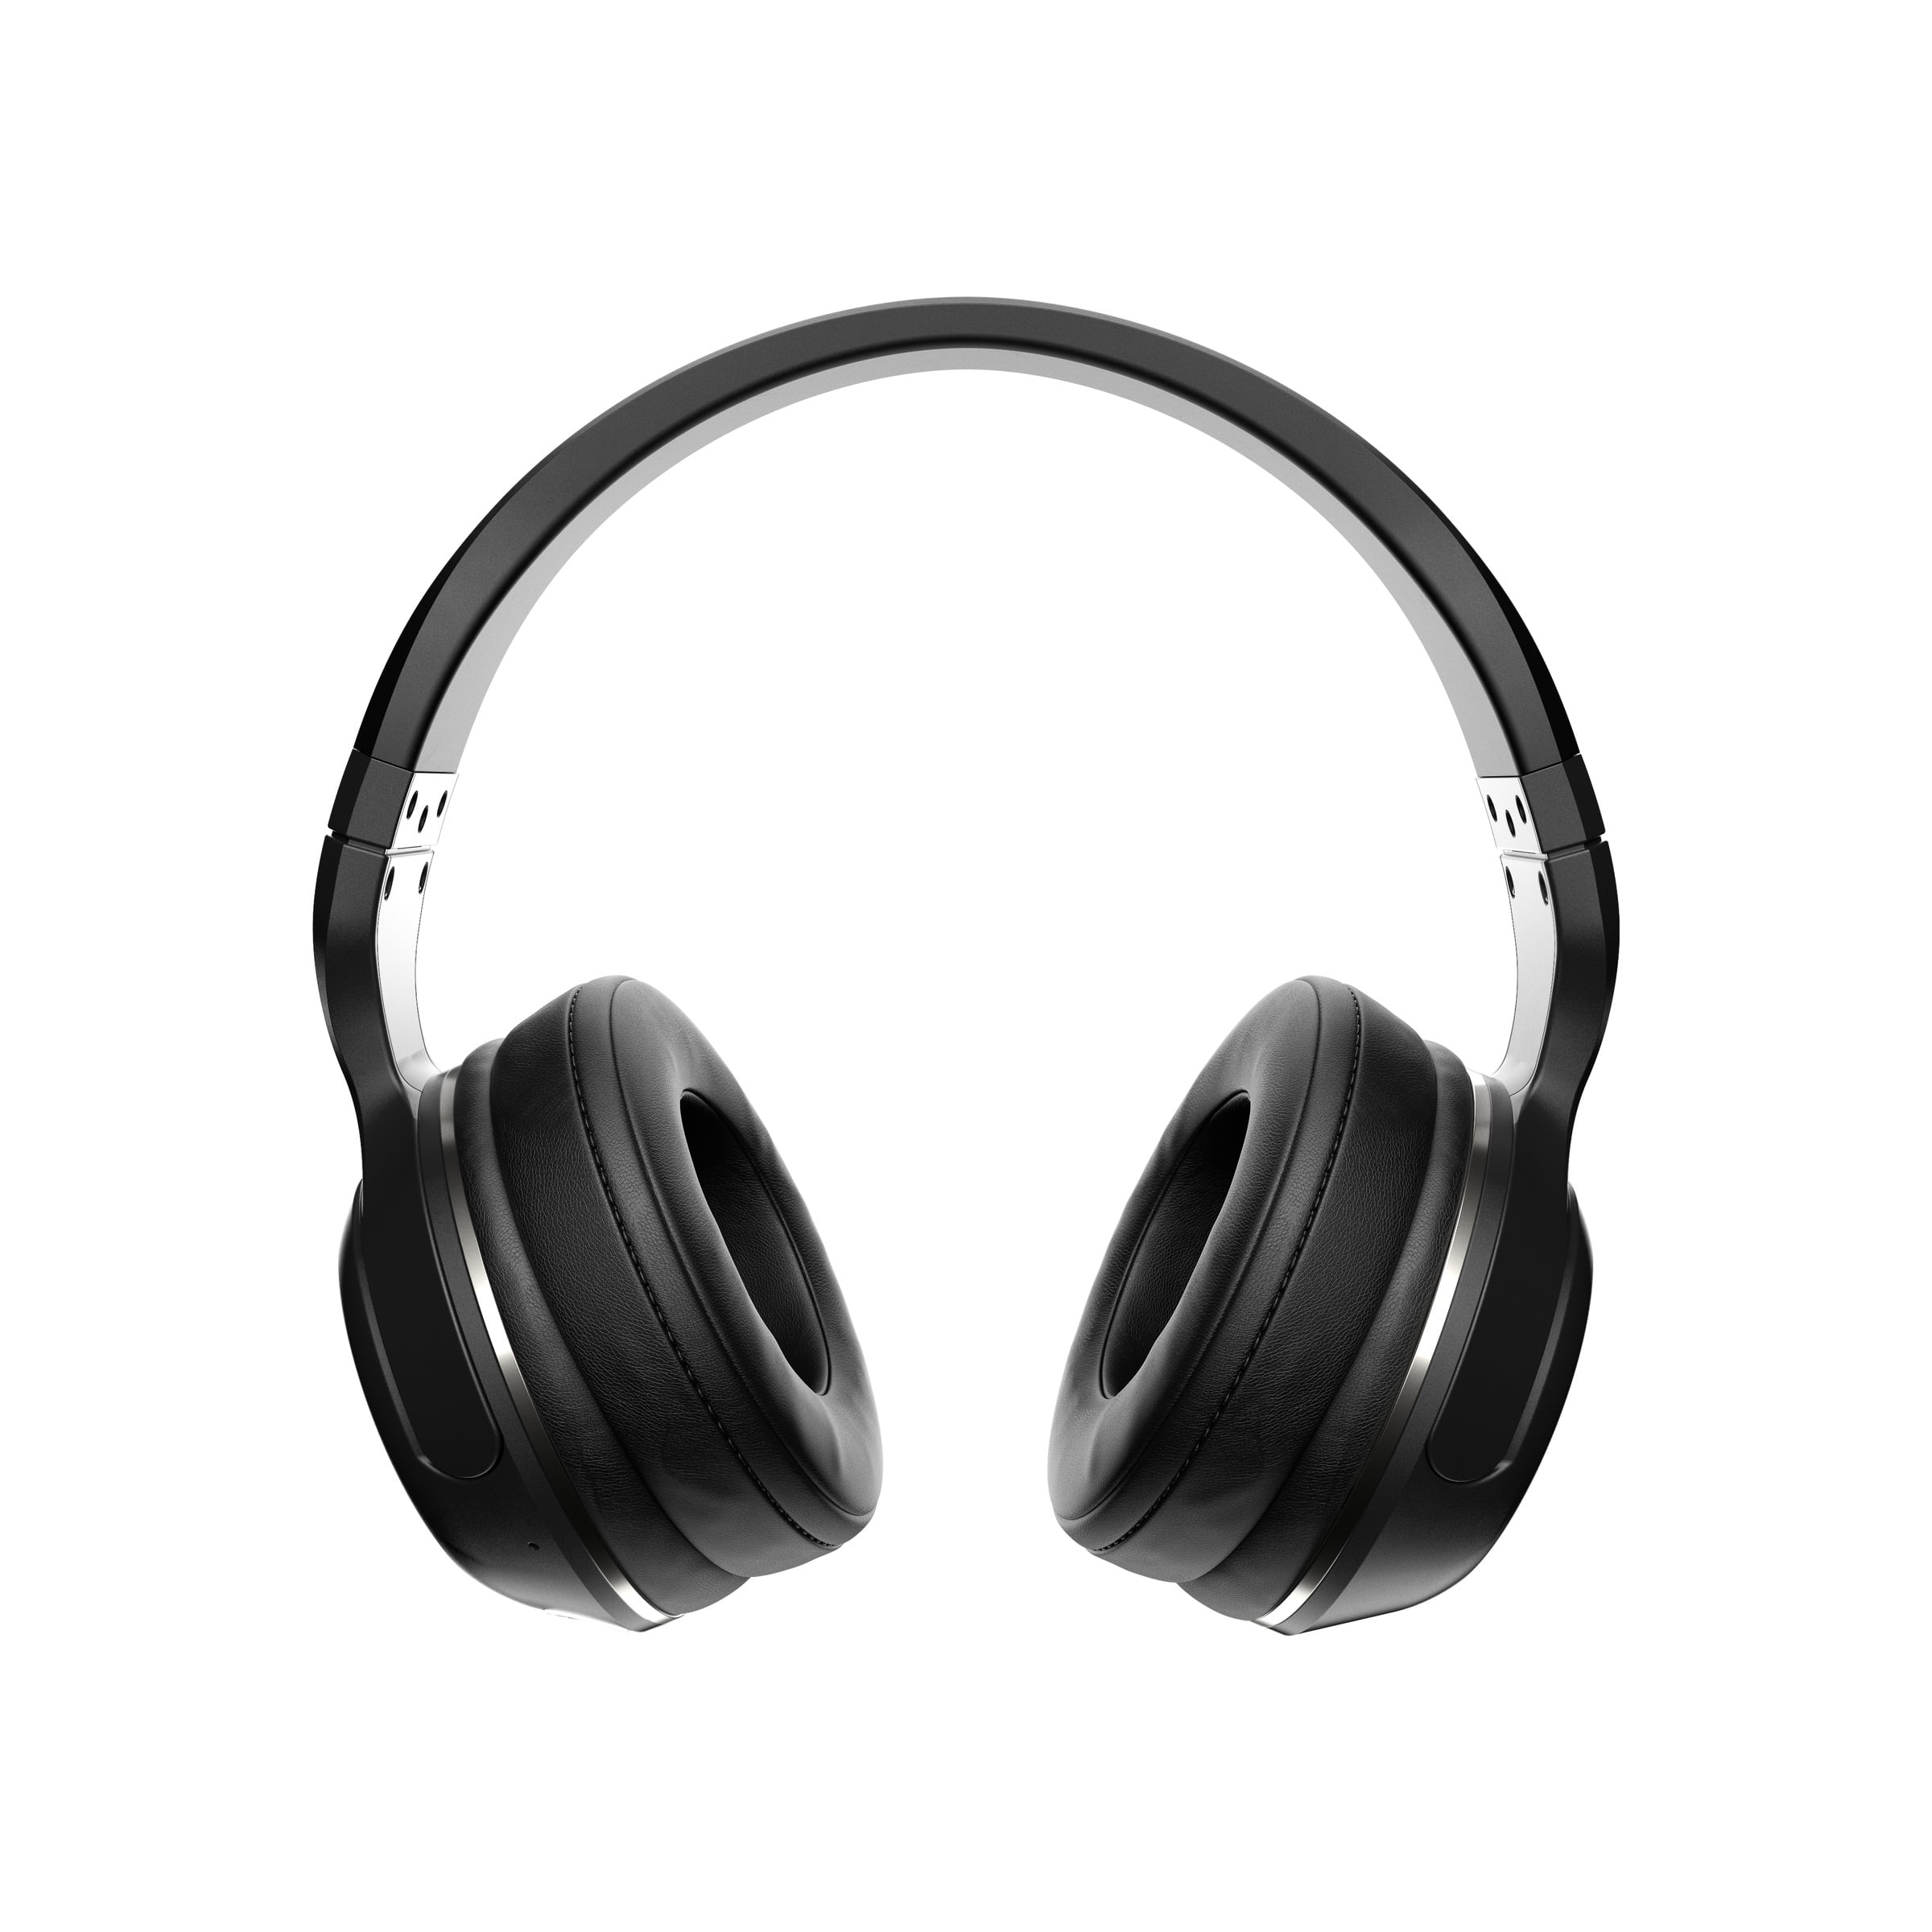 Skullcandy Hesh 2 Wireless Bluetooth 5.0 Over-Ear Headphones with 50mm  Drivers, Durable Headband, and Travel Case